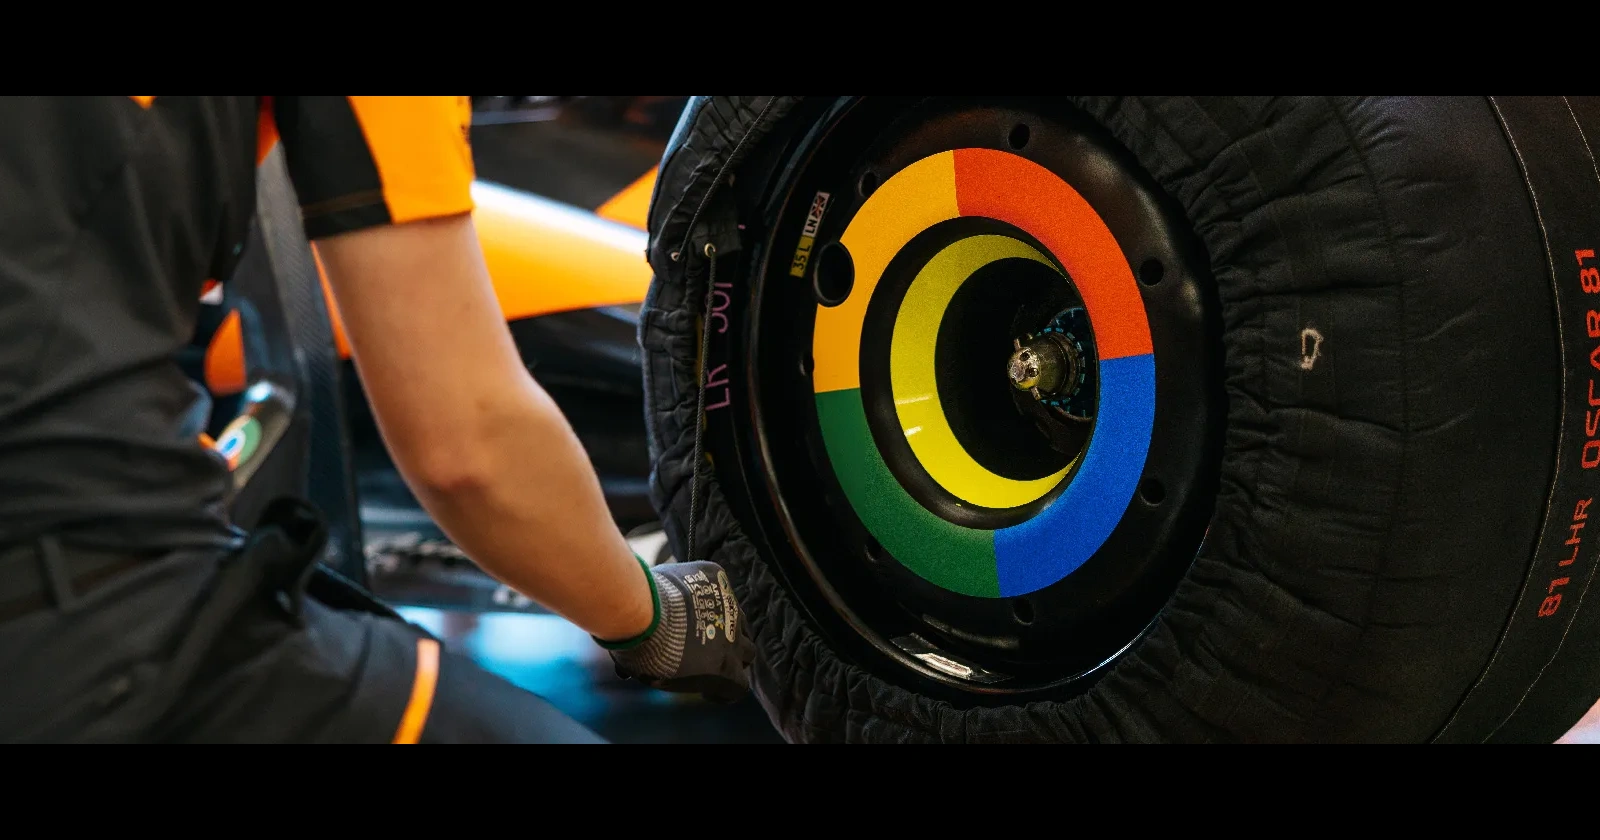 Google & McLaren expand partnership to show off Pixel phones and other services in F1 & Extreme E